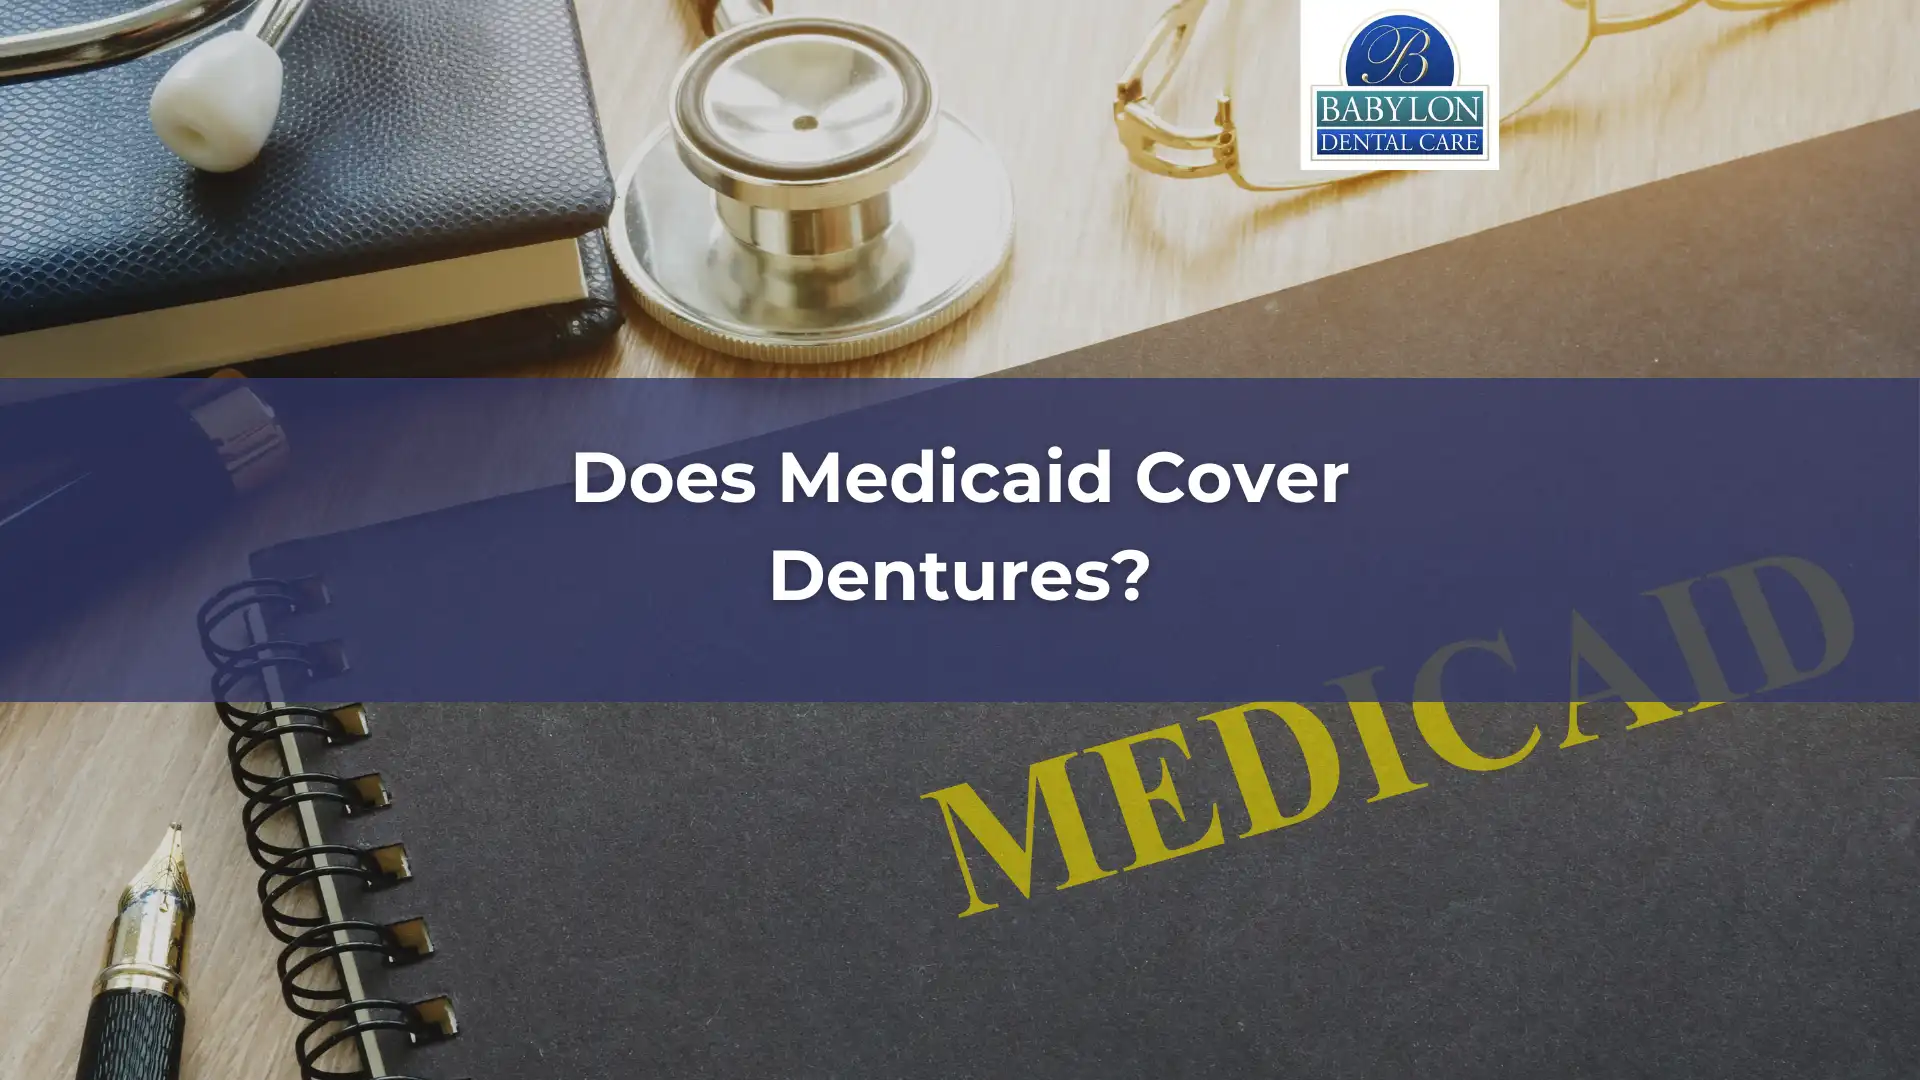 Does Medicaid Cover Dentures